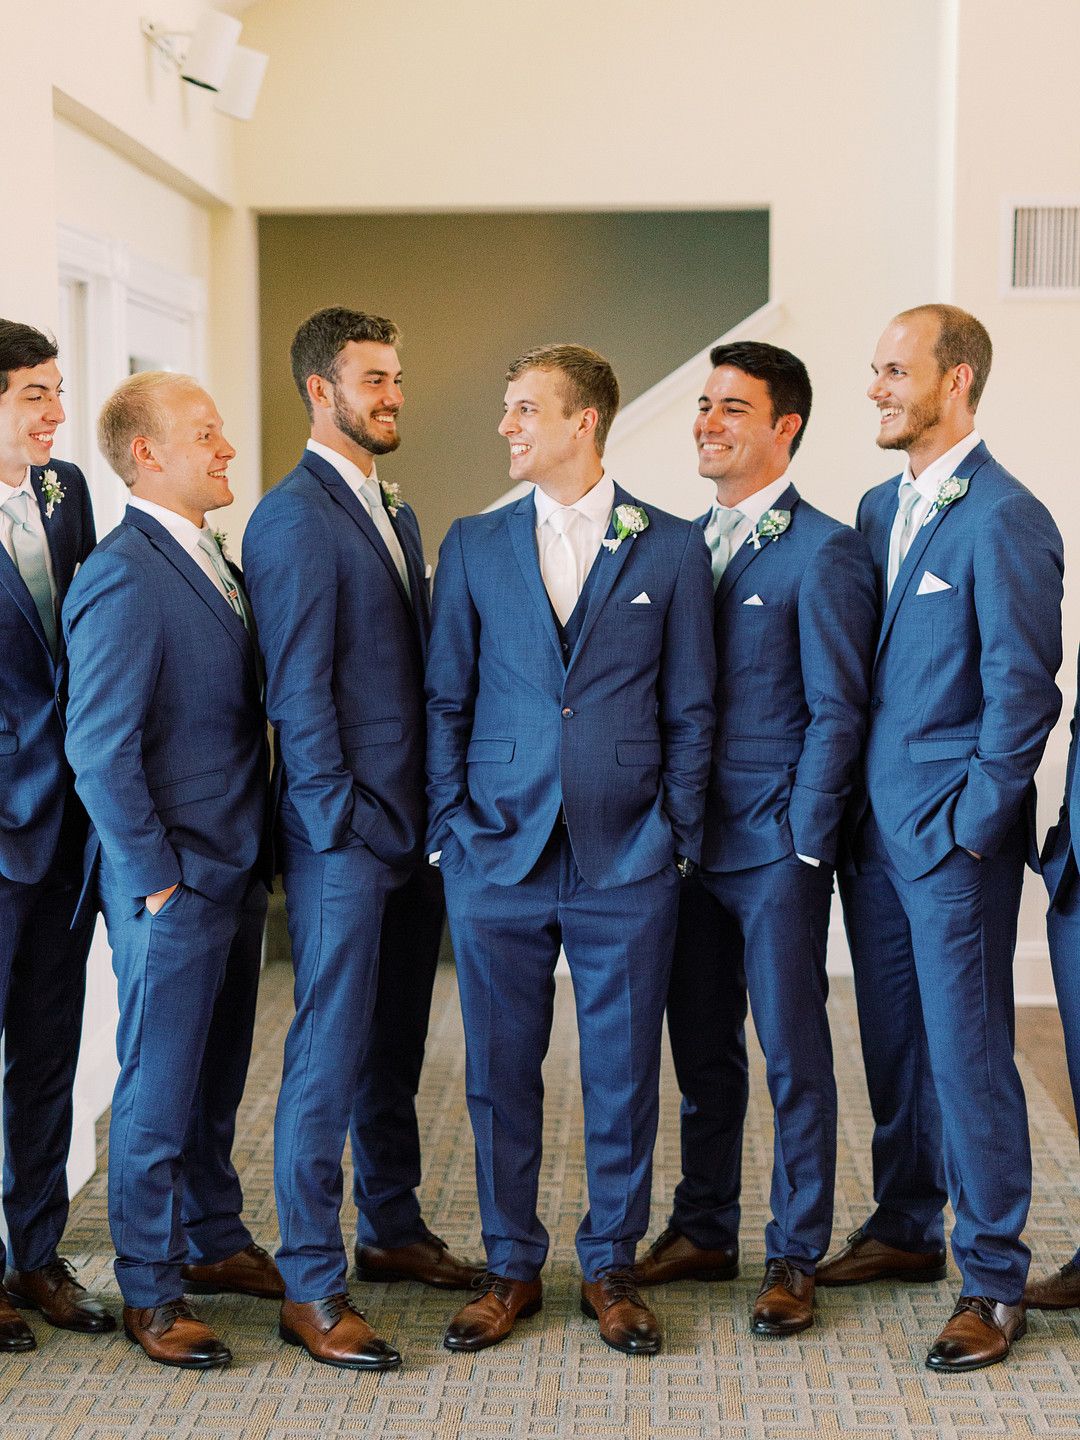 Groom and groomsmen standing together in navy suits